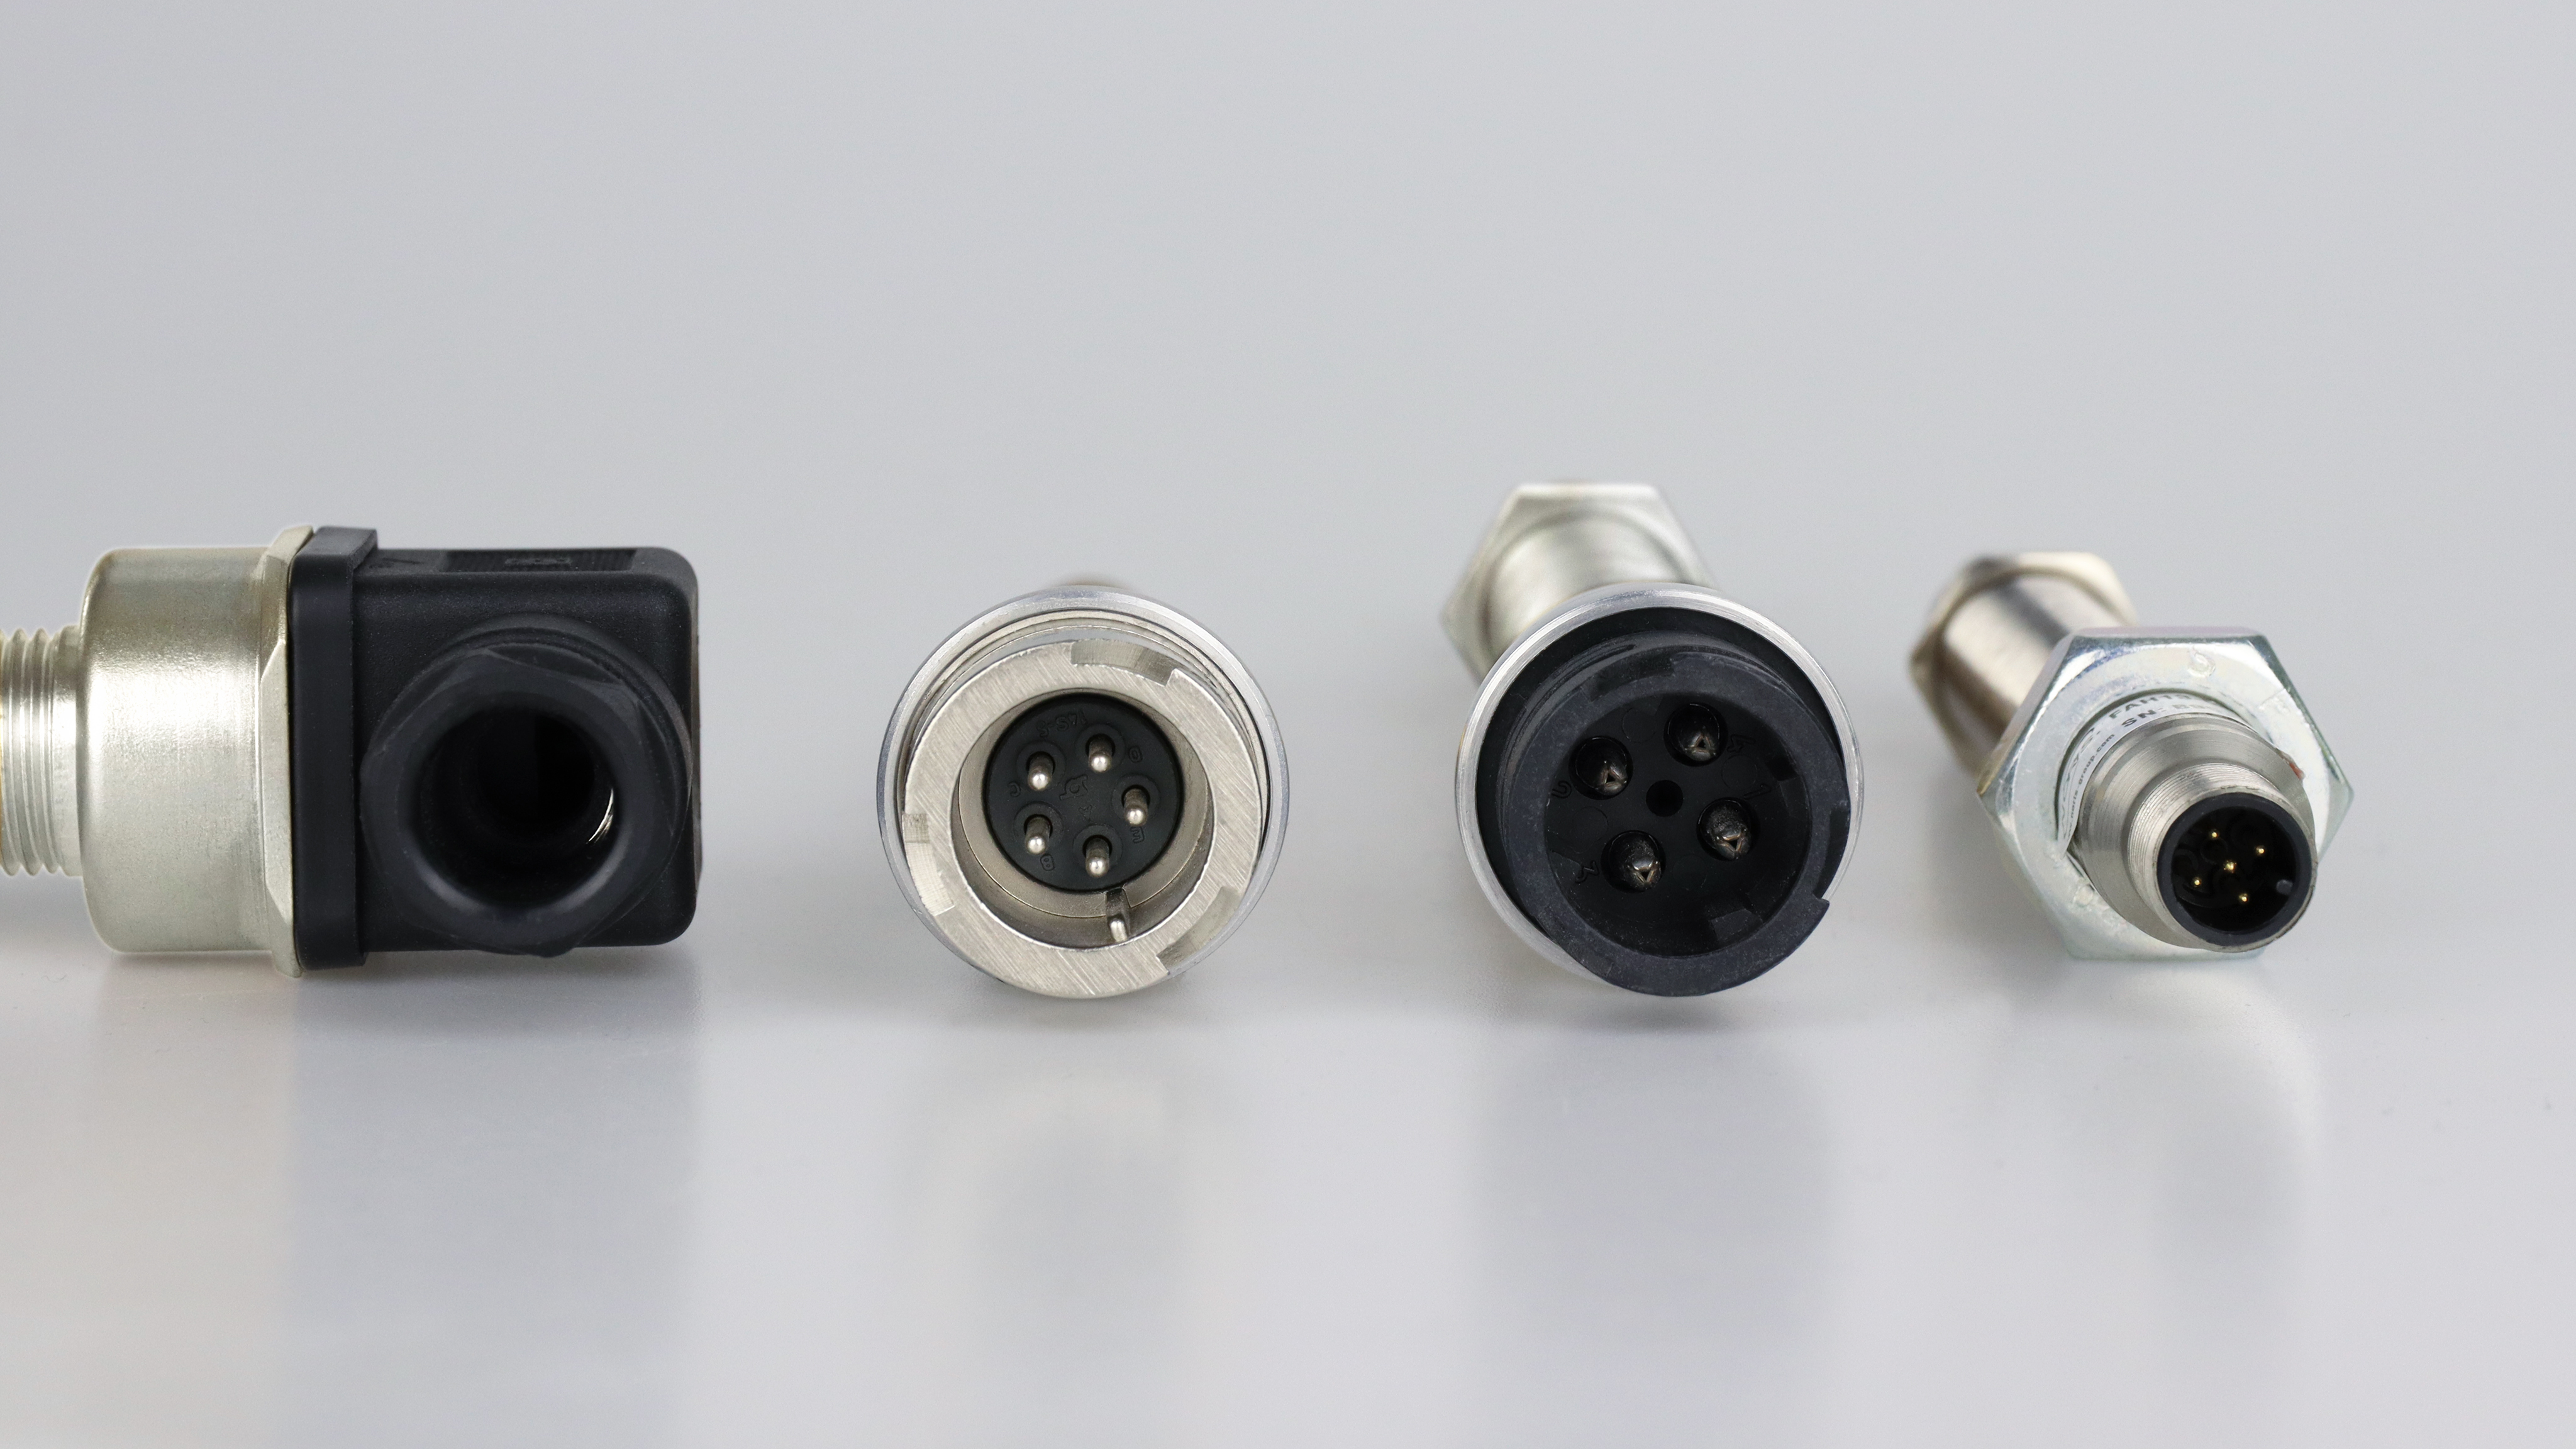 The image shows 4 connector plug  variants laying on a grey background